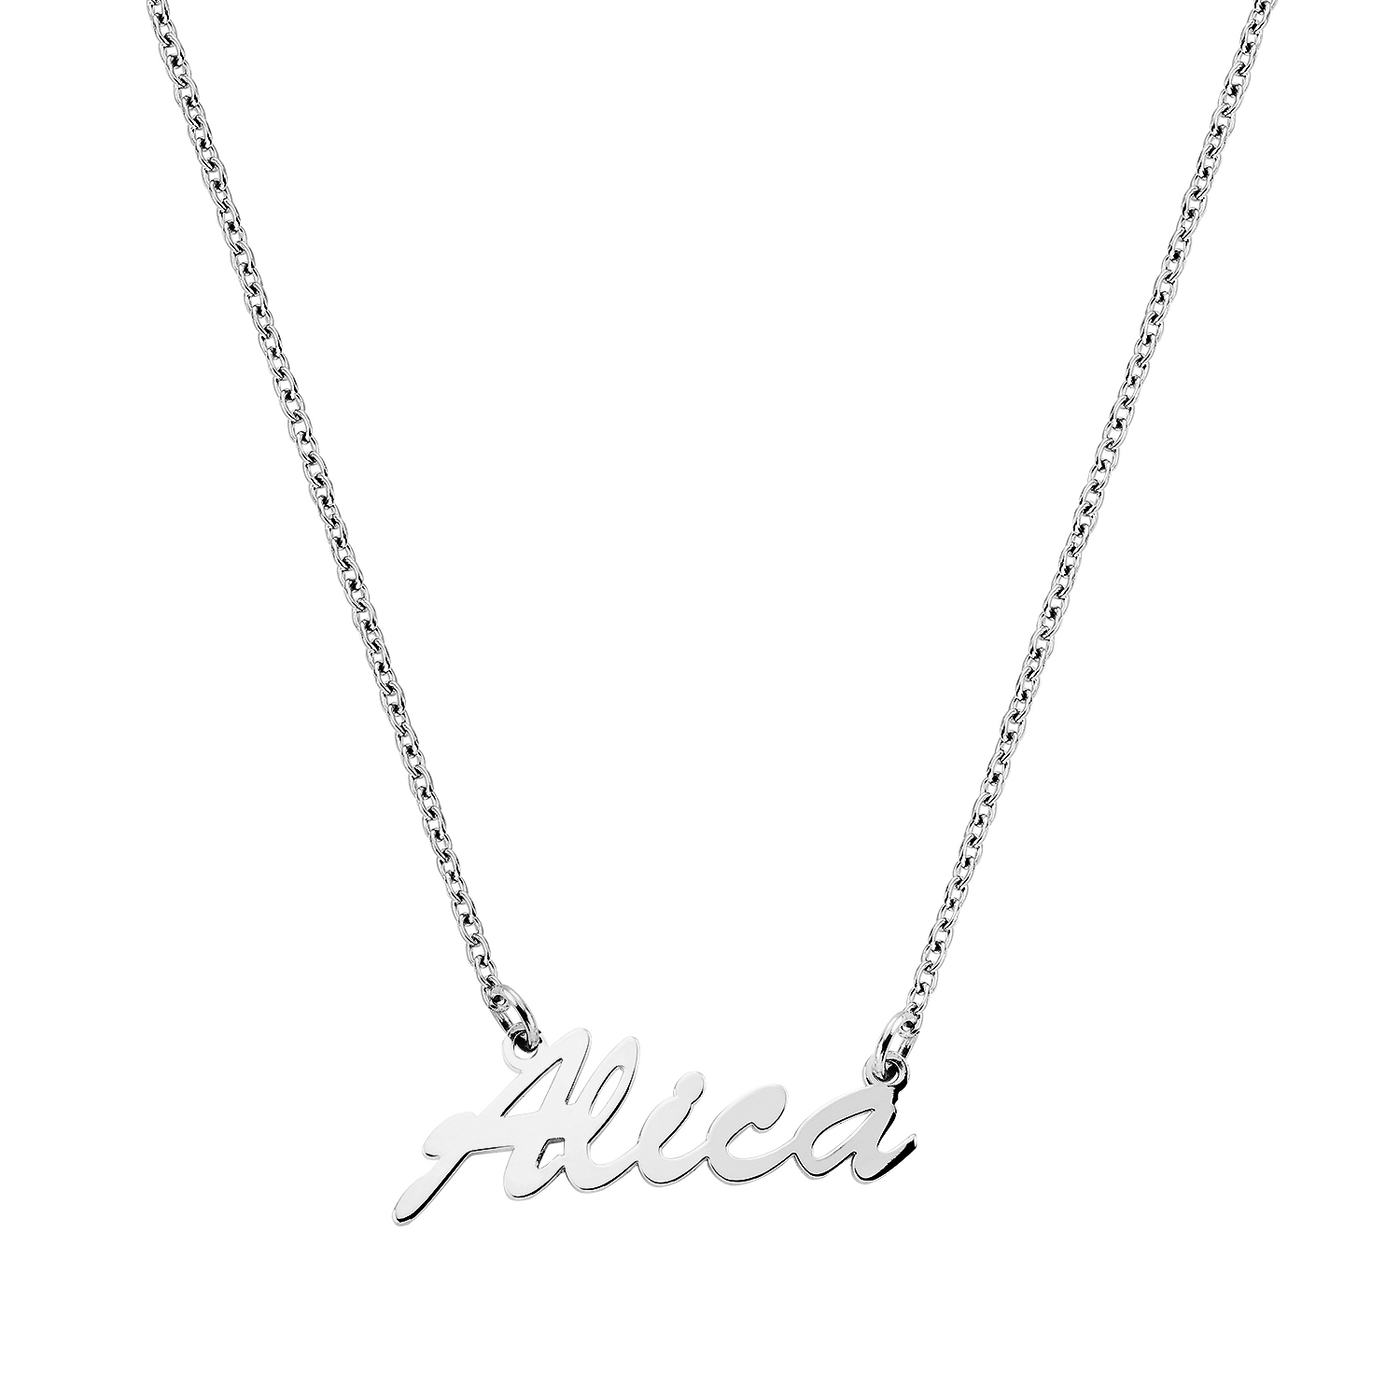 Name necklace - variant Alica